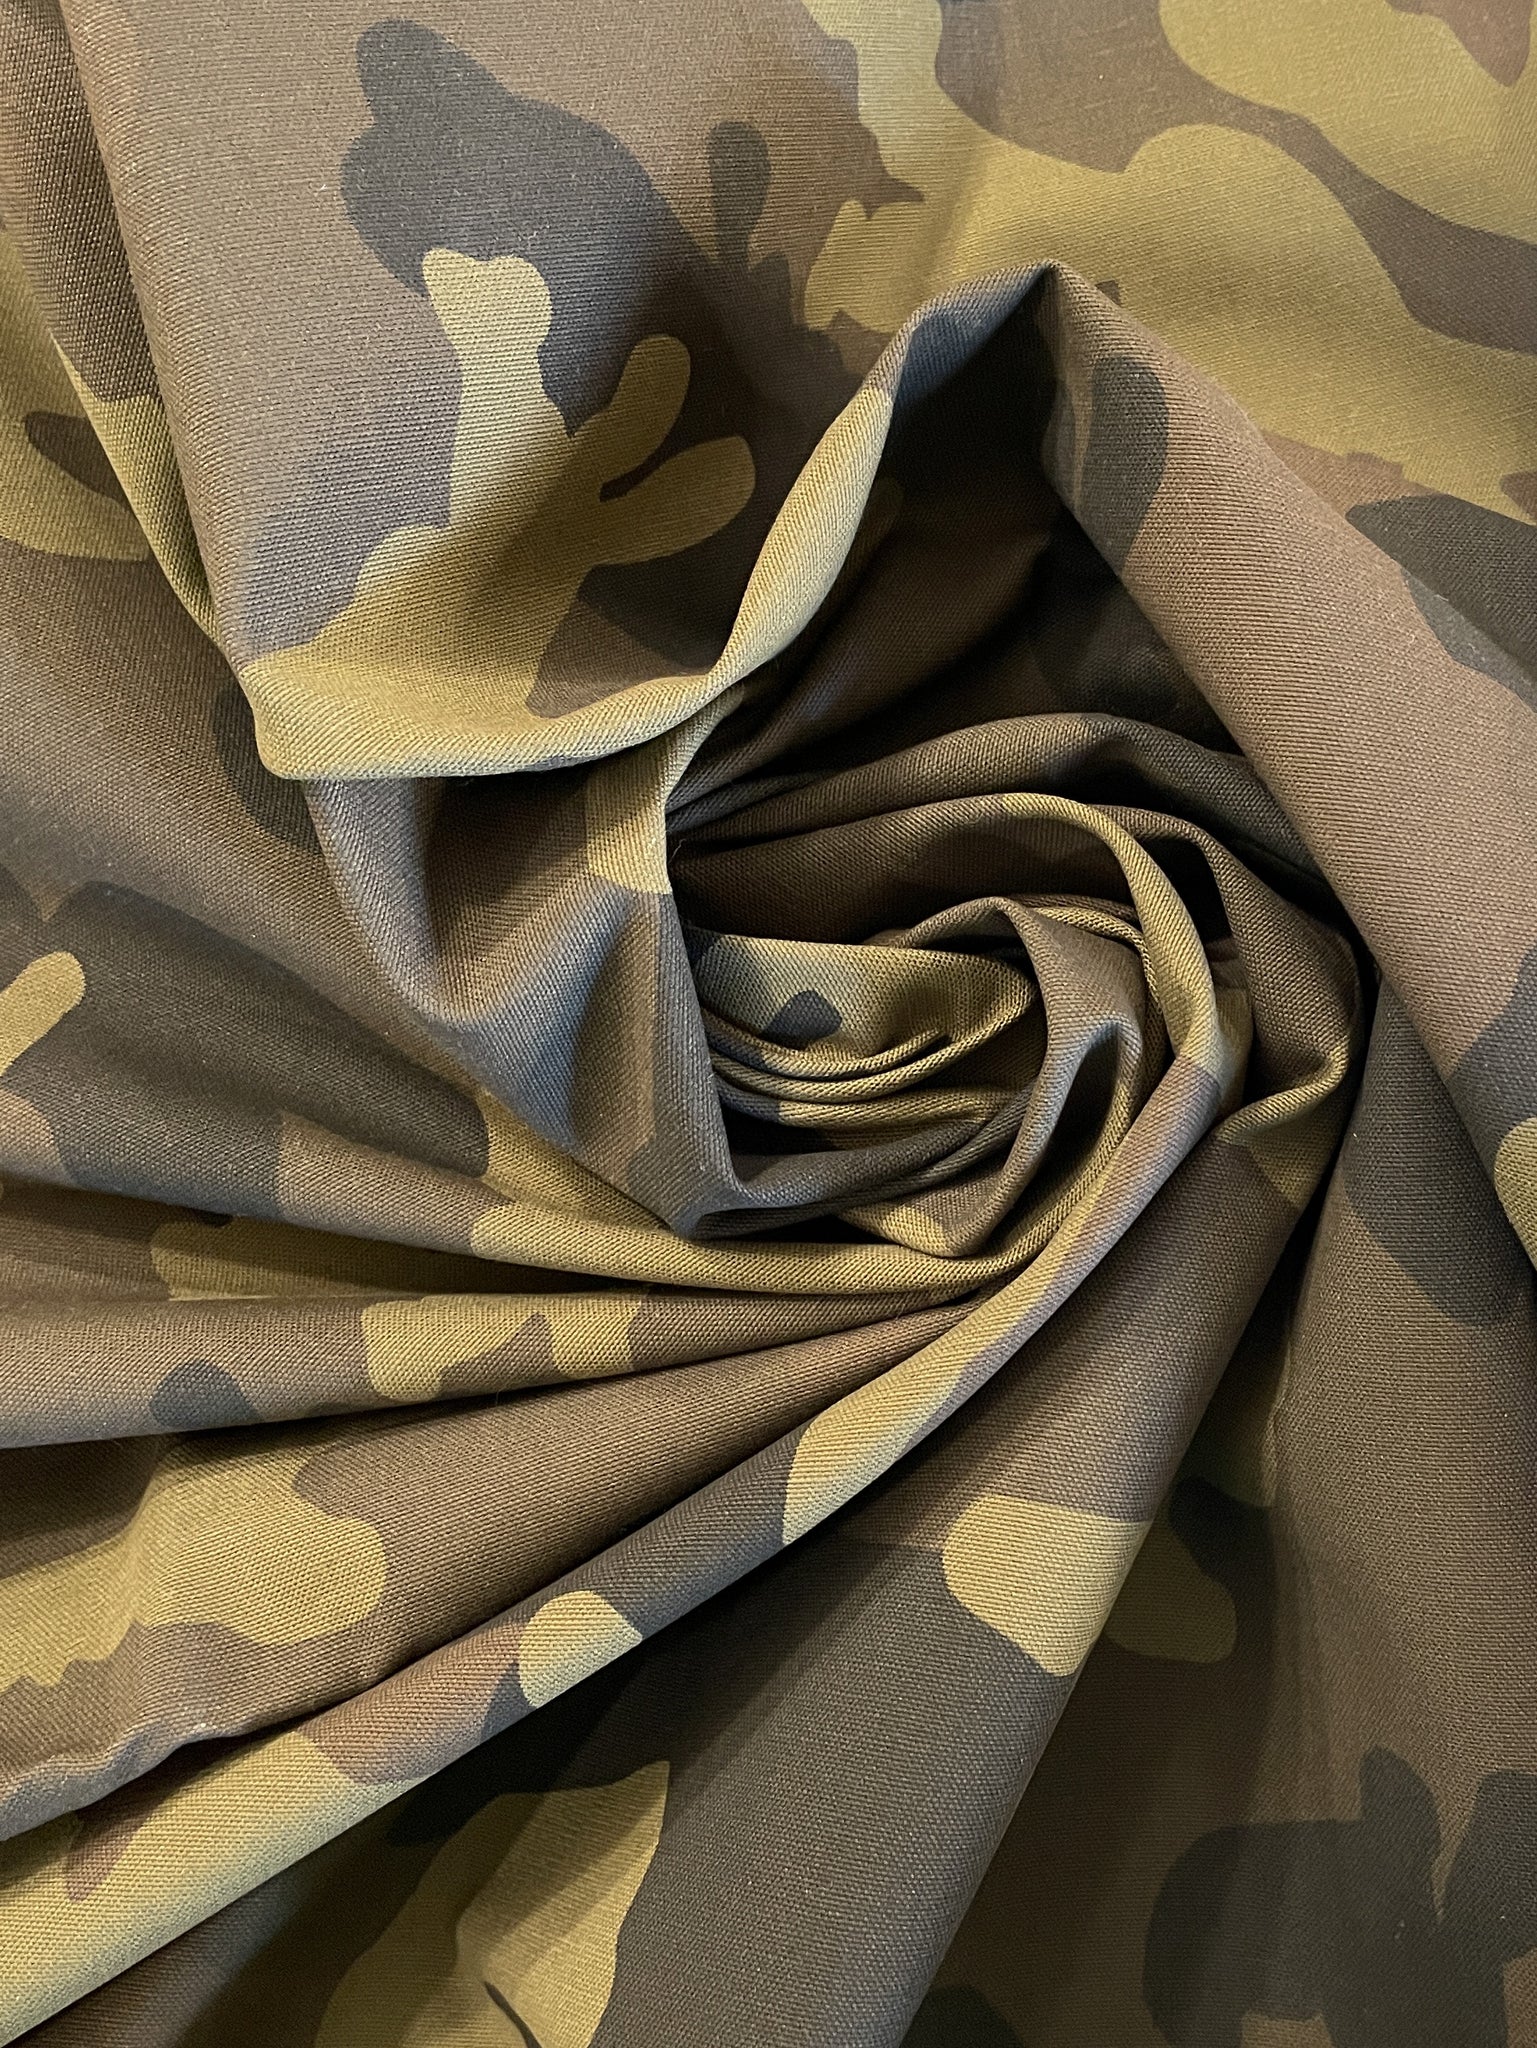 SALE 2 5/8+ YD Cotton Camouflage - Jungle Greens, Brown and Black